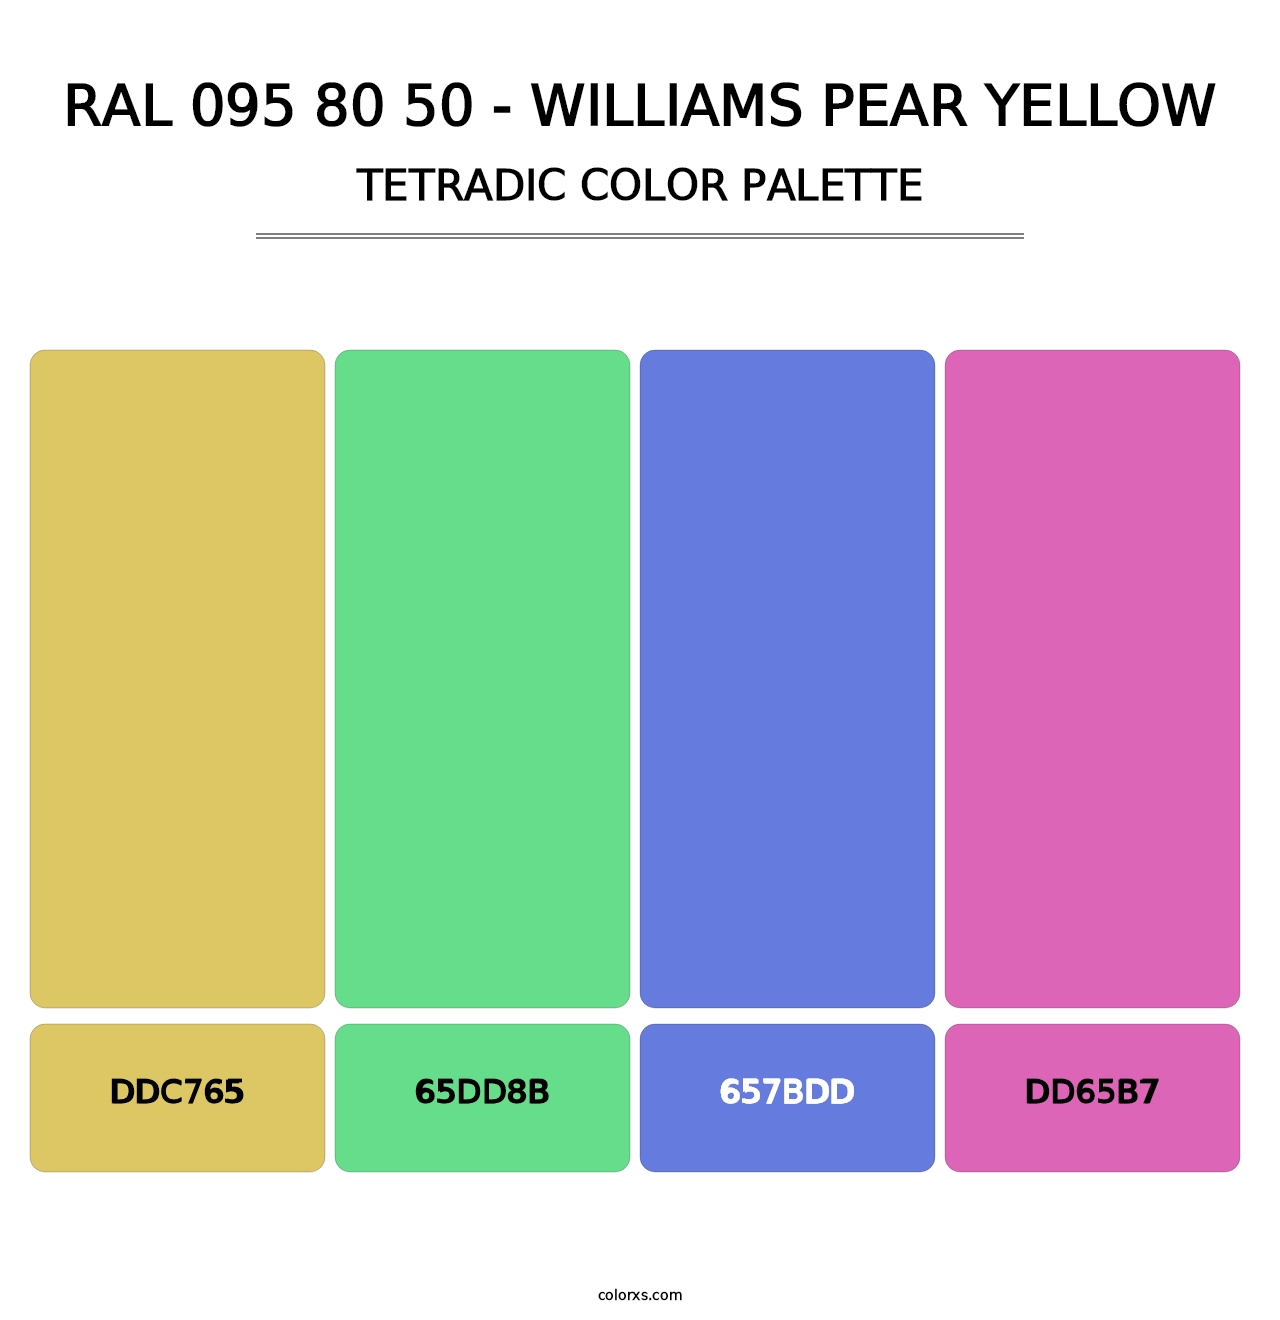 RAL 095 80 50 - Williams Pear Yellow - Tetradic Color Palette